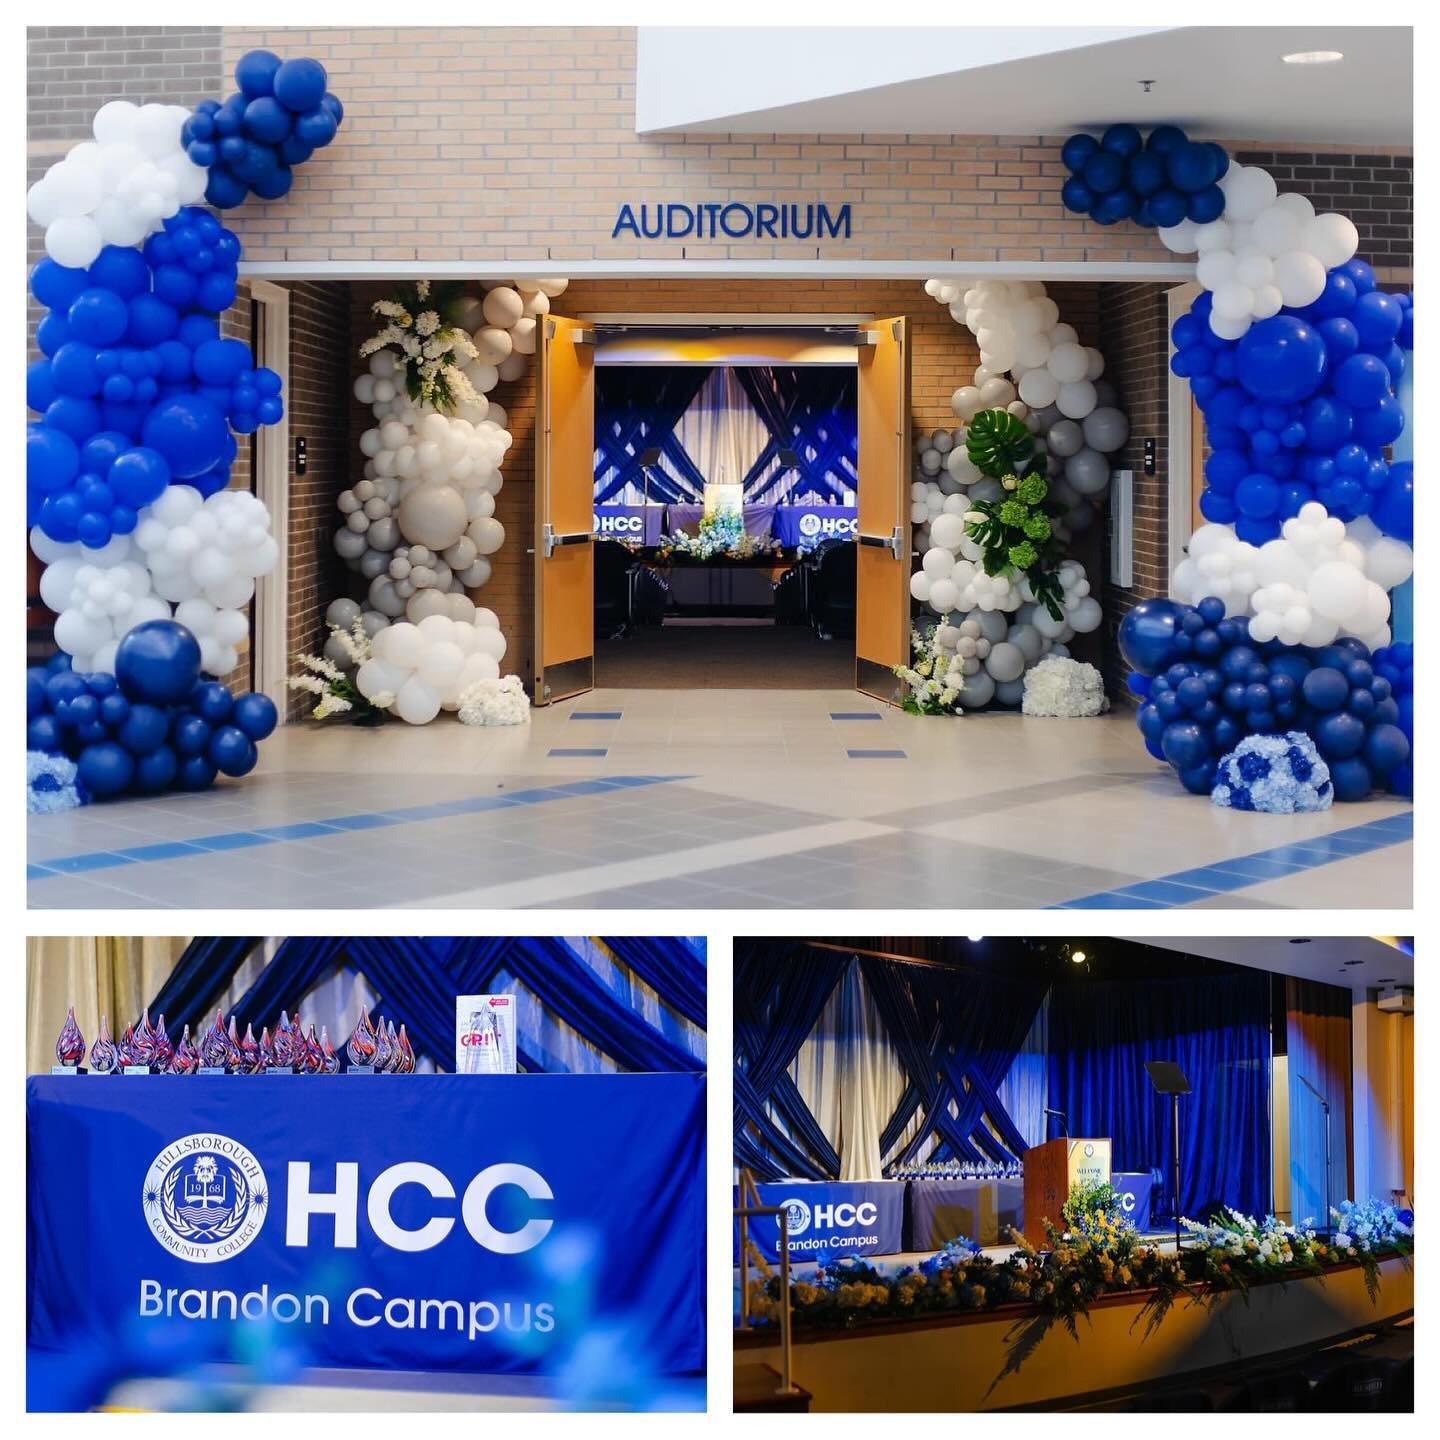 Award ceremony at HCC where we provided the Draped Backdrop for the stage. Pleasure working with Elegant Evening Events, Bloomingdays Florist, &amp; Masterworks Rentals! &mdash;&mdash;&mdash;&mdash;&mdash;&mdash;&mdash;&mdash;&mdash;&mdash;&mdash;&md